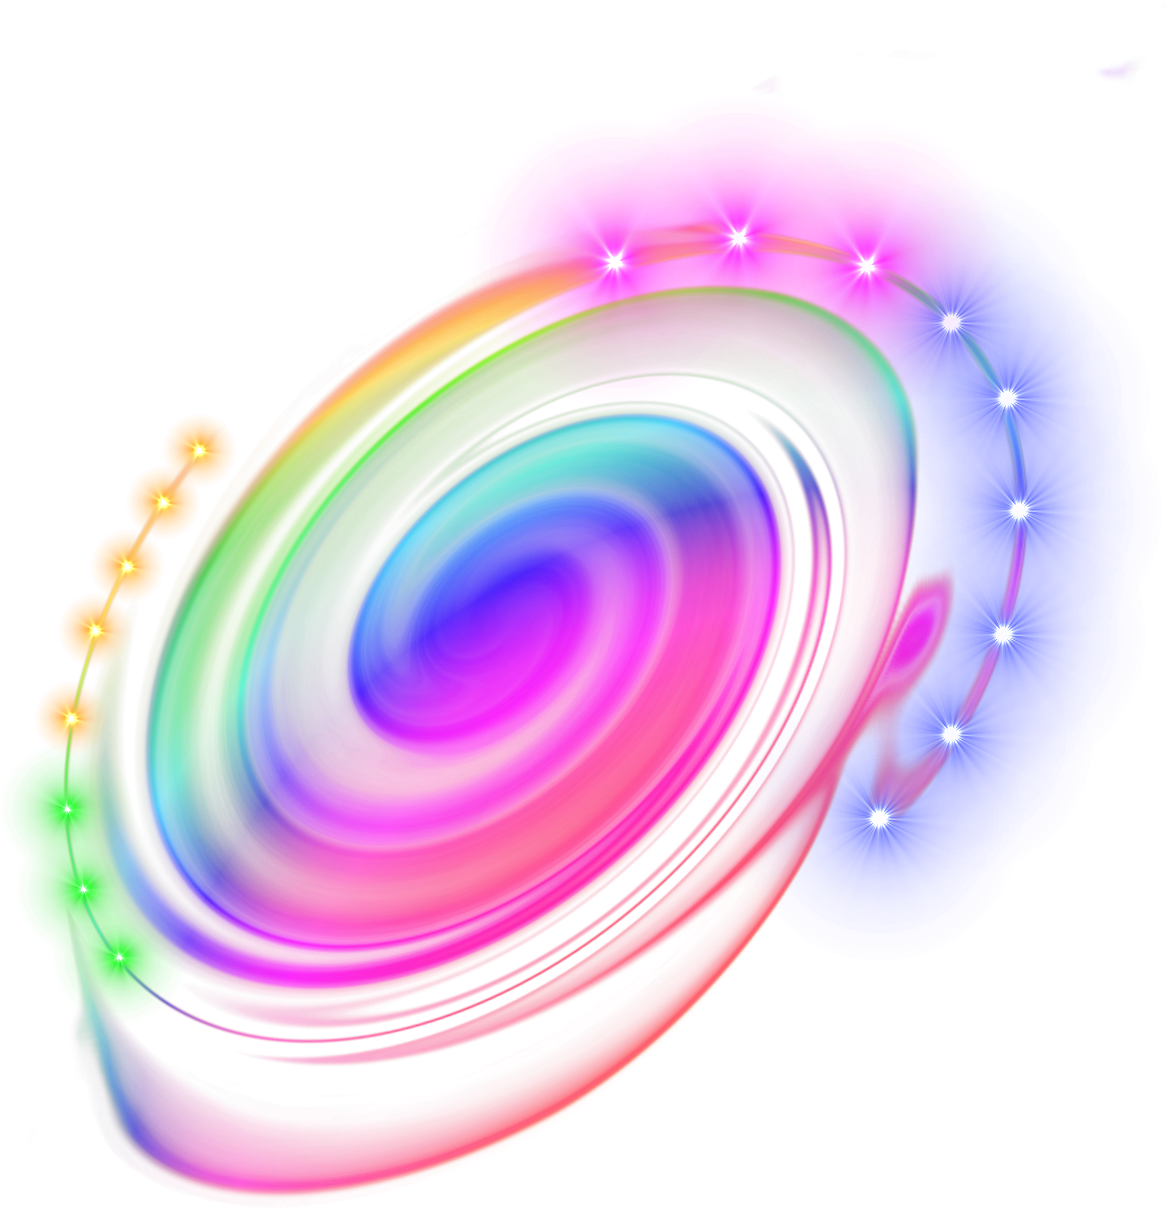 A Colorful Spiral With Lights